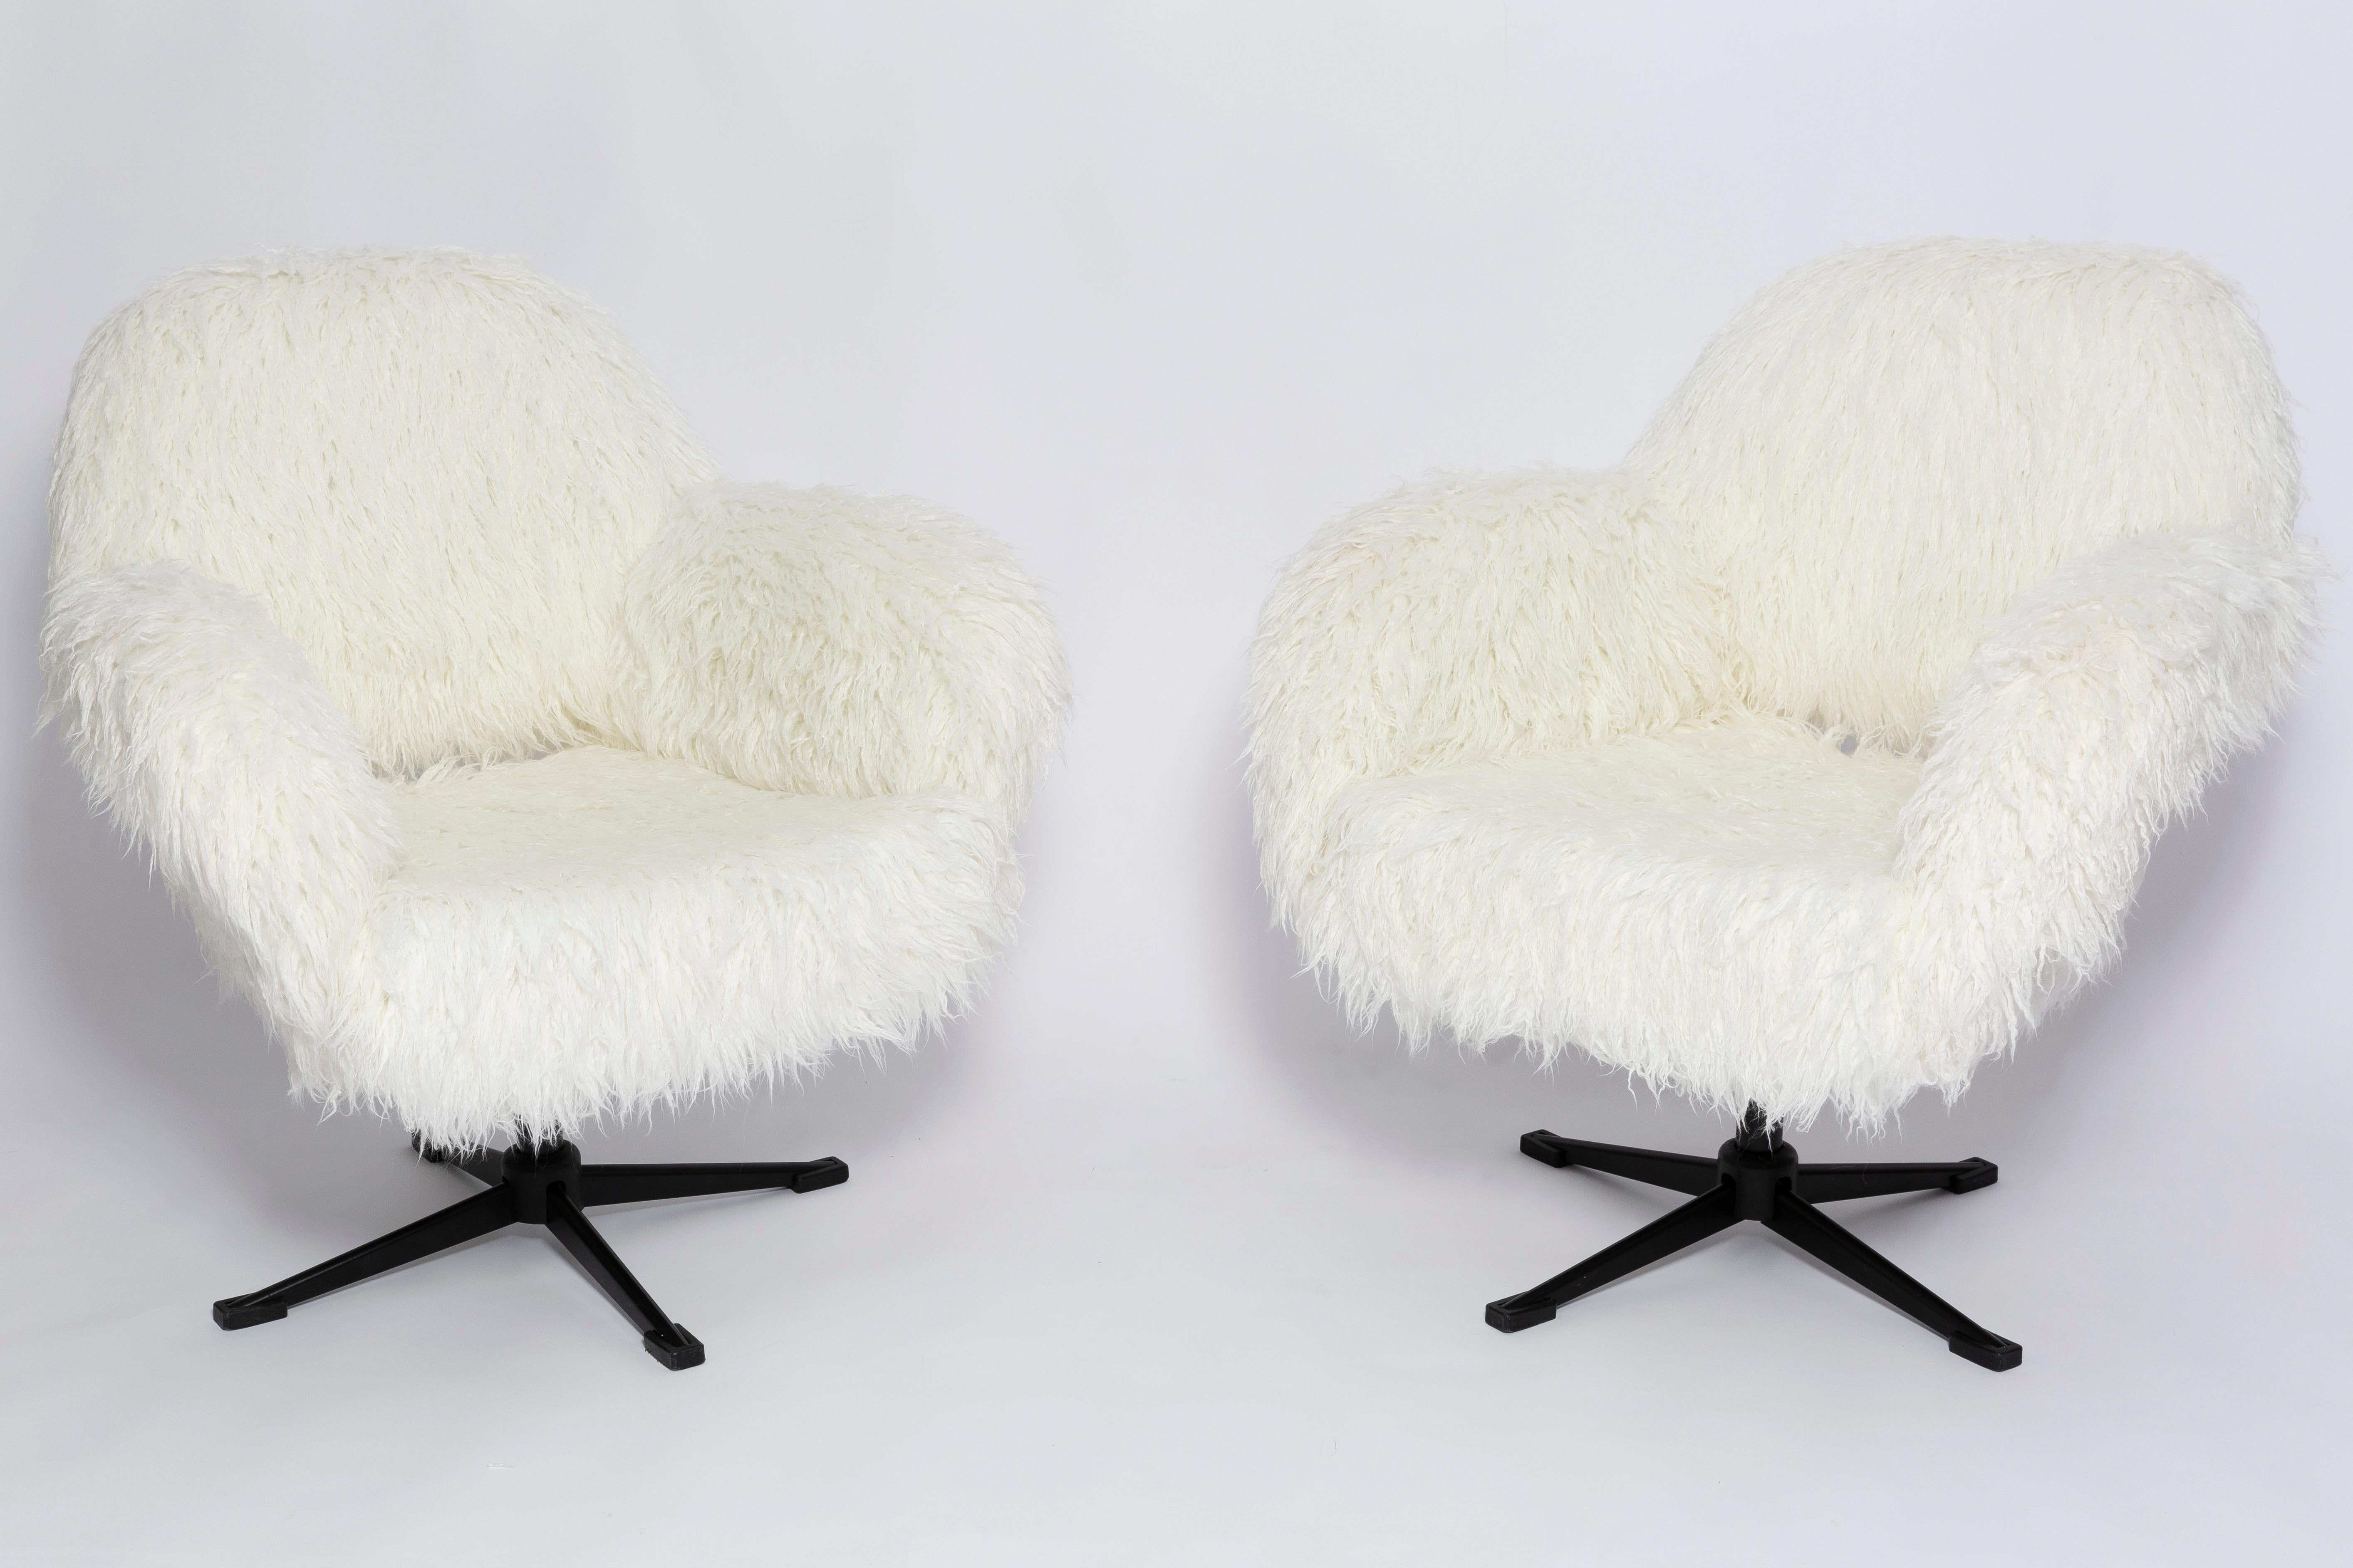 Pair of swivel armchairs from the 1960s, produced in the Silesian furniture factory in Swiebodzin - at the moment they are unique. Very comfortable. Due to their dimensions, they perfectly blend in even in small apartments providing comfort and